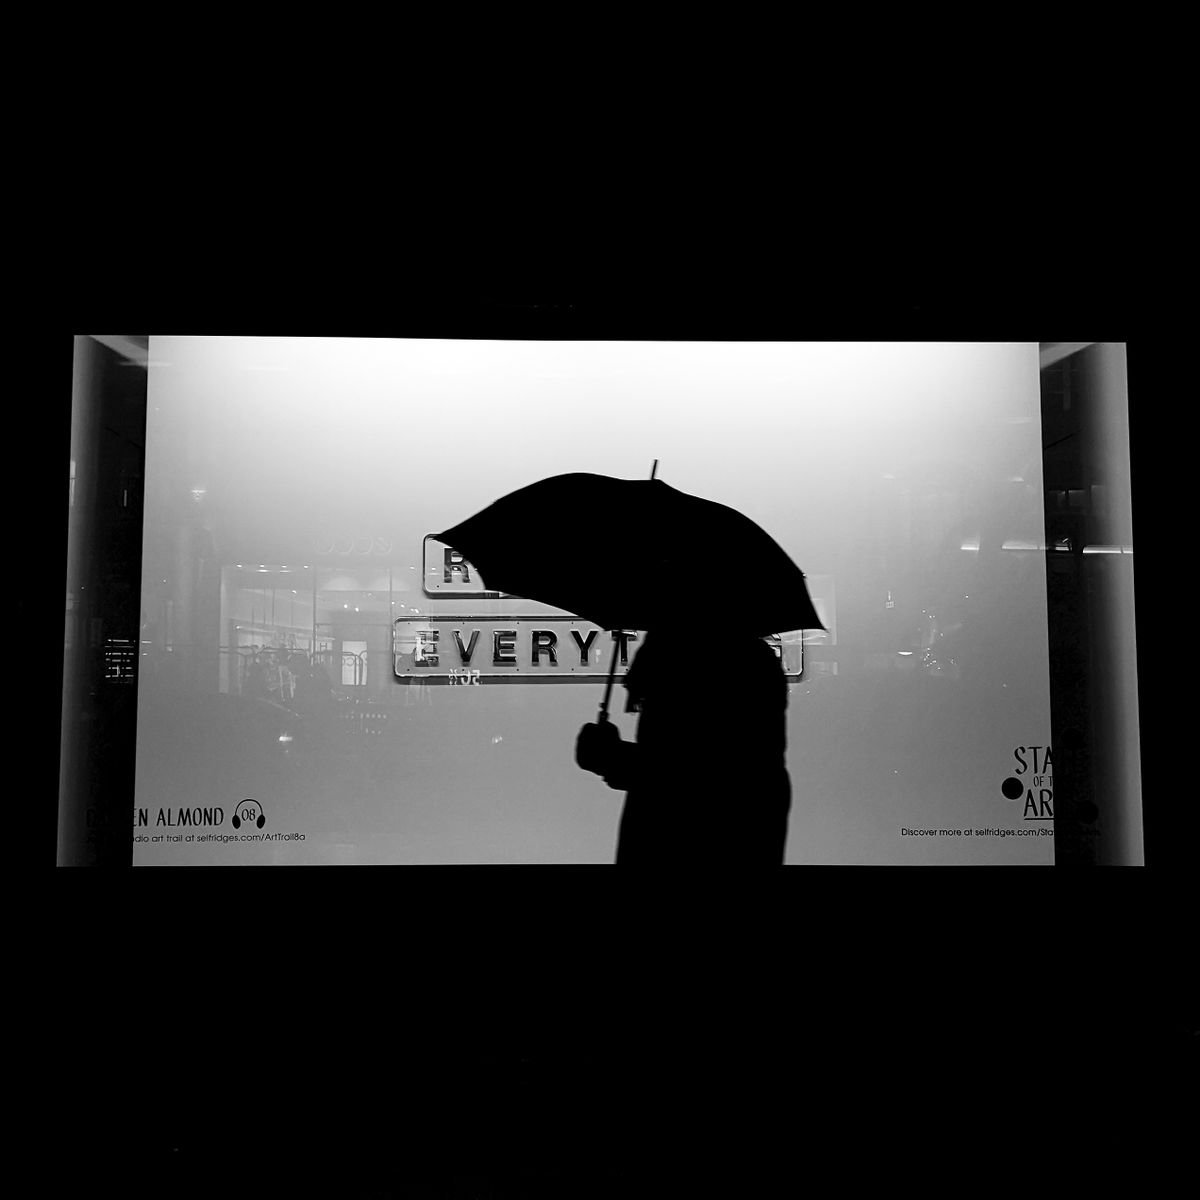 Rider On The Storm - Black And White Night Photography Print, 12x12 Inches, C-Type, Unfram... by Amadeus Long